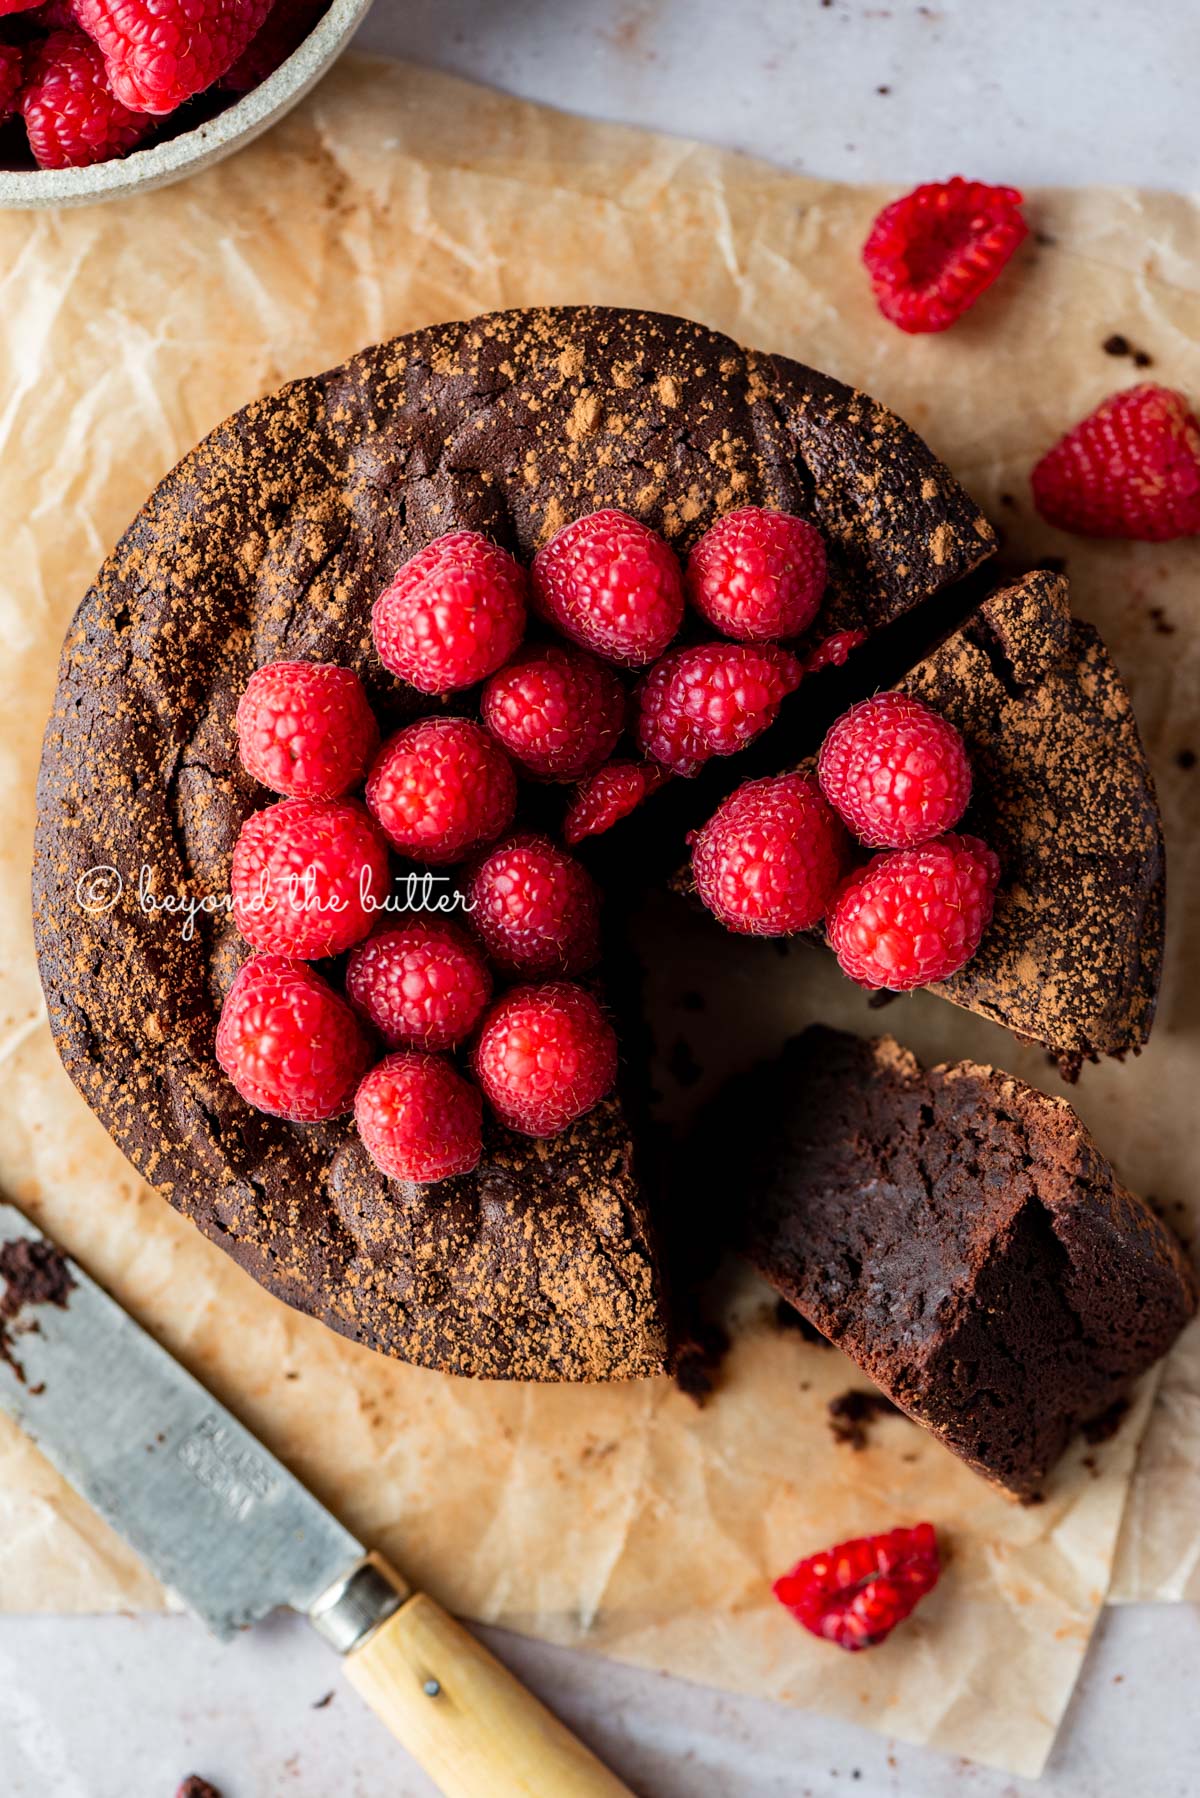 Sliced small flourless chocolate cake topped with cocoa powder and fresh raspberries on parchment paper | All images © Beyond the Butter®